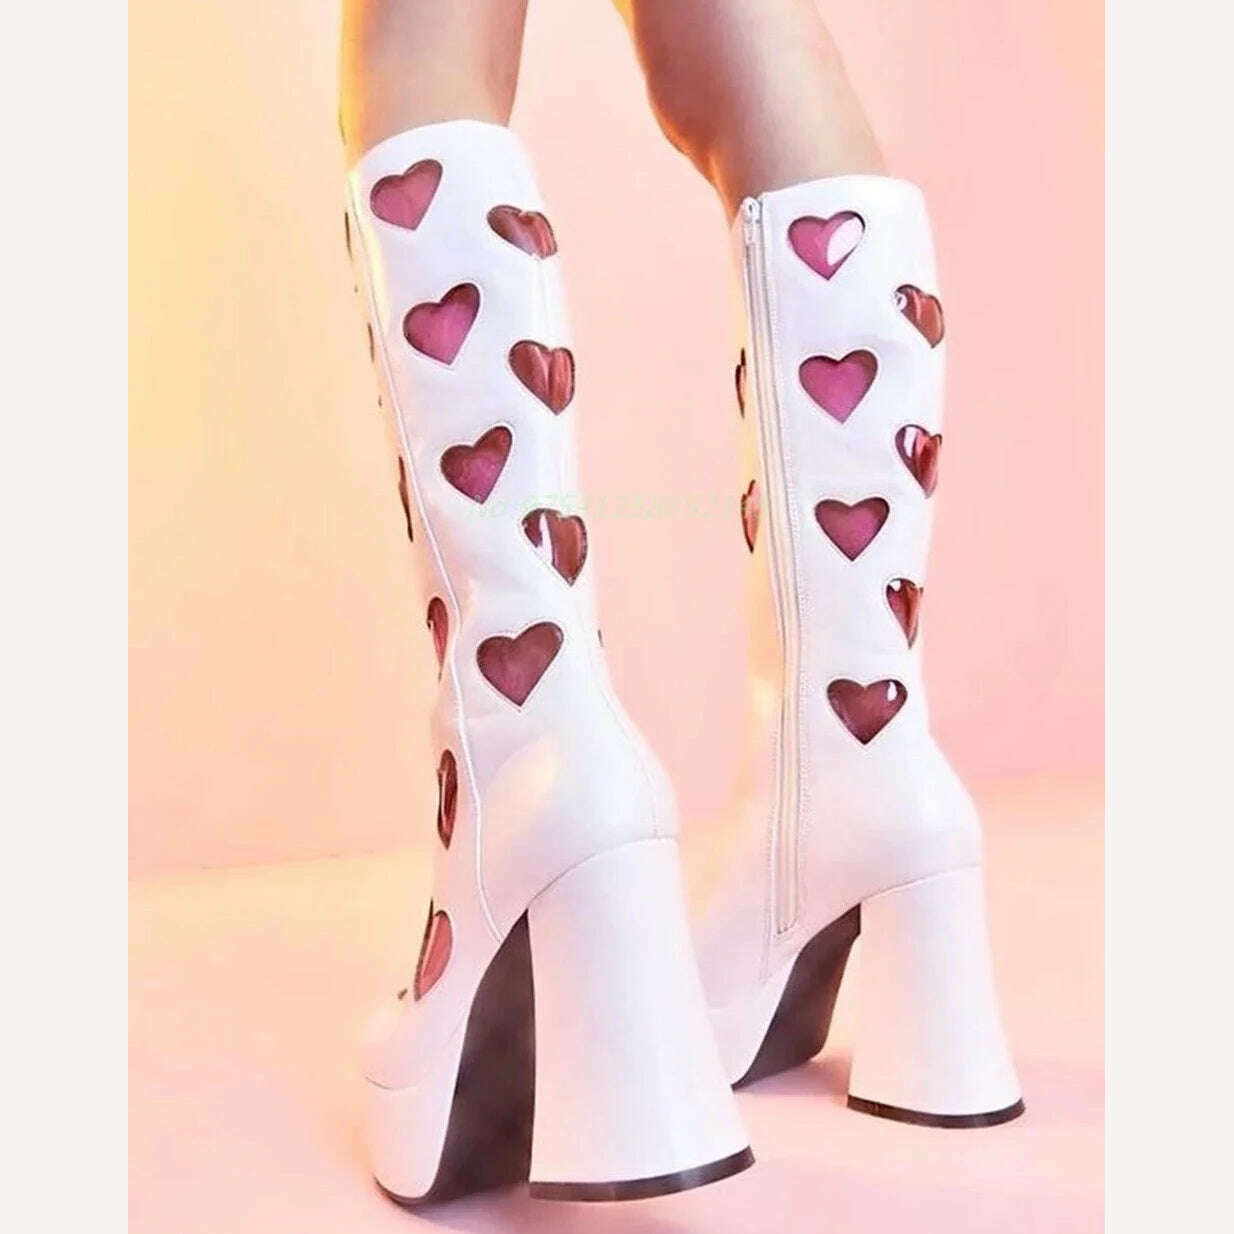 KIMLUD, Heart Platform Sweet Women Boots Splicing Thick Chunky Party Shoes Patent Leather Fashion Catwalk Pink White Mid- Calf New 2023, as picture 1 / 35 / CHINA, KIMLUD Women's Clothes